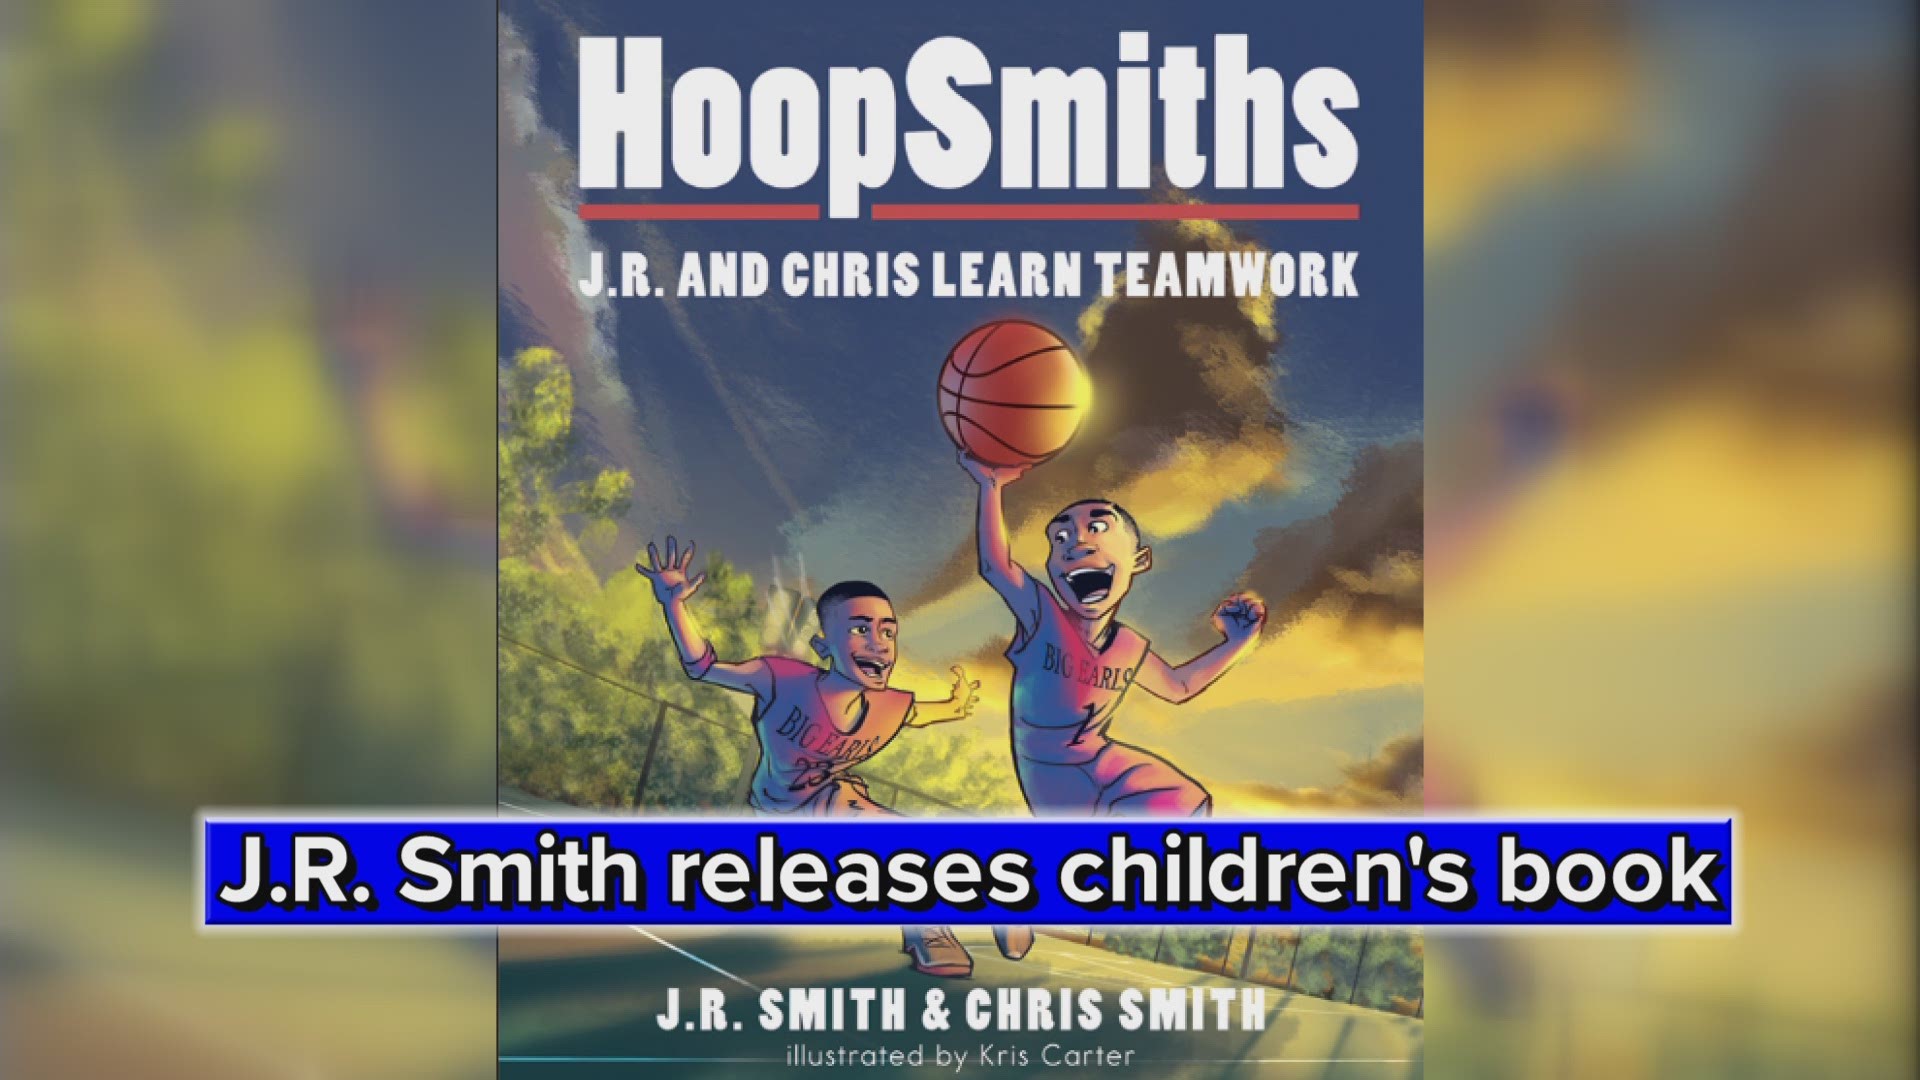 Cleveland Cavaliers G J.R. Smith releases children's book